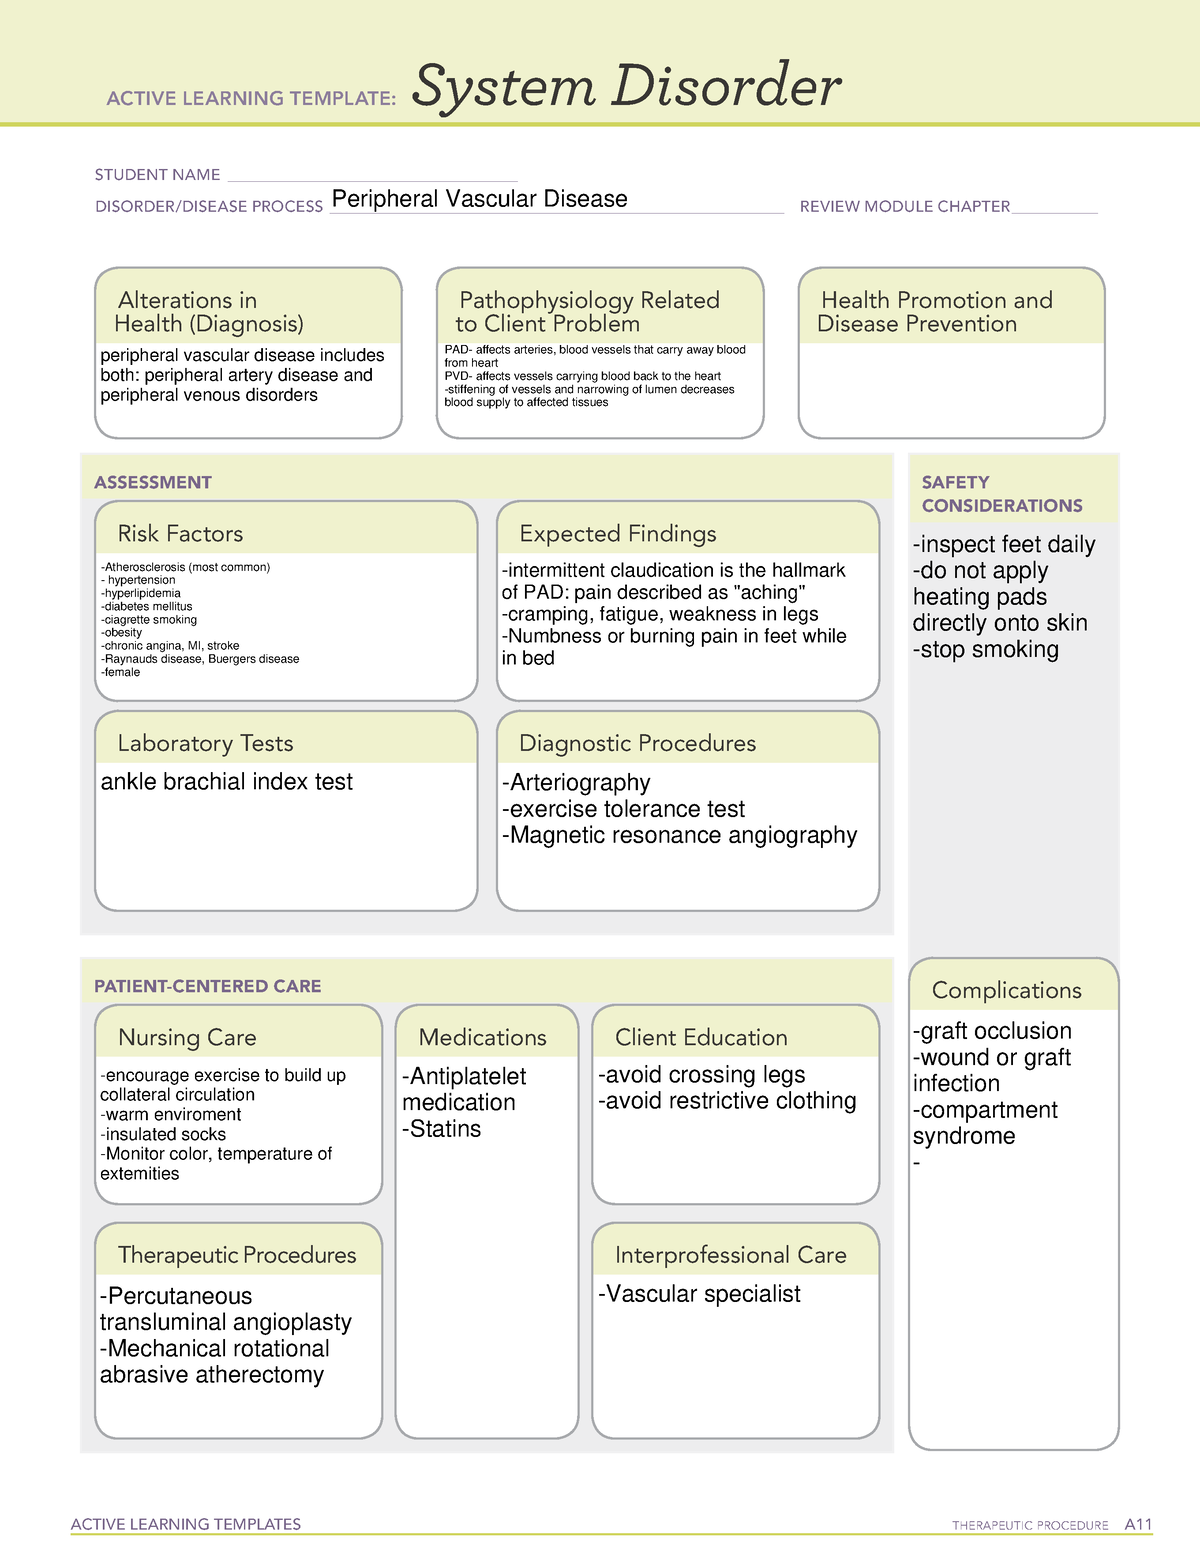 system disorder peripheral vascular disease - ACTIVE LEARNING TEMPLATES ...